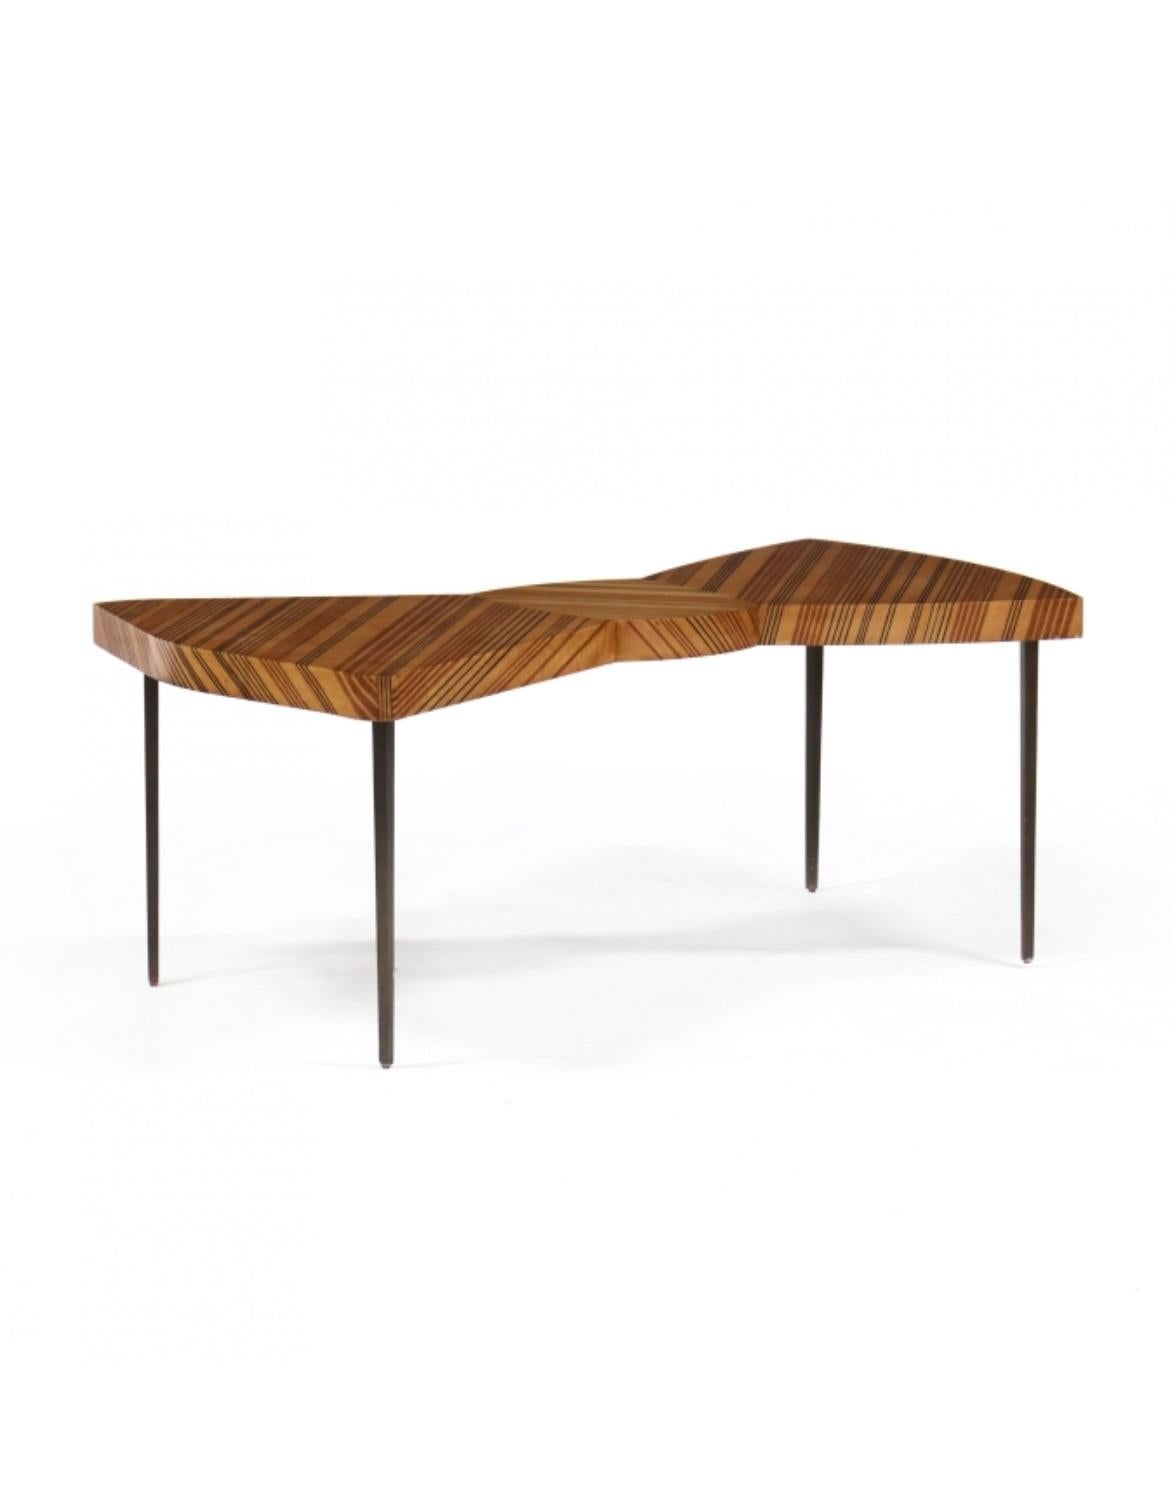 Jonathon Charles Furniture, contemporary, maple with walnut and ebony line inlays to the top and edges, coffee or accent table with bronze tone metal legs, unmarked.

Measures: 47.5 W x 25.75 D x 19.5 H

The table offered here is from a 2012